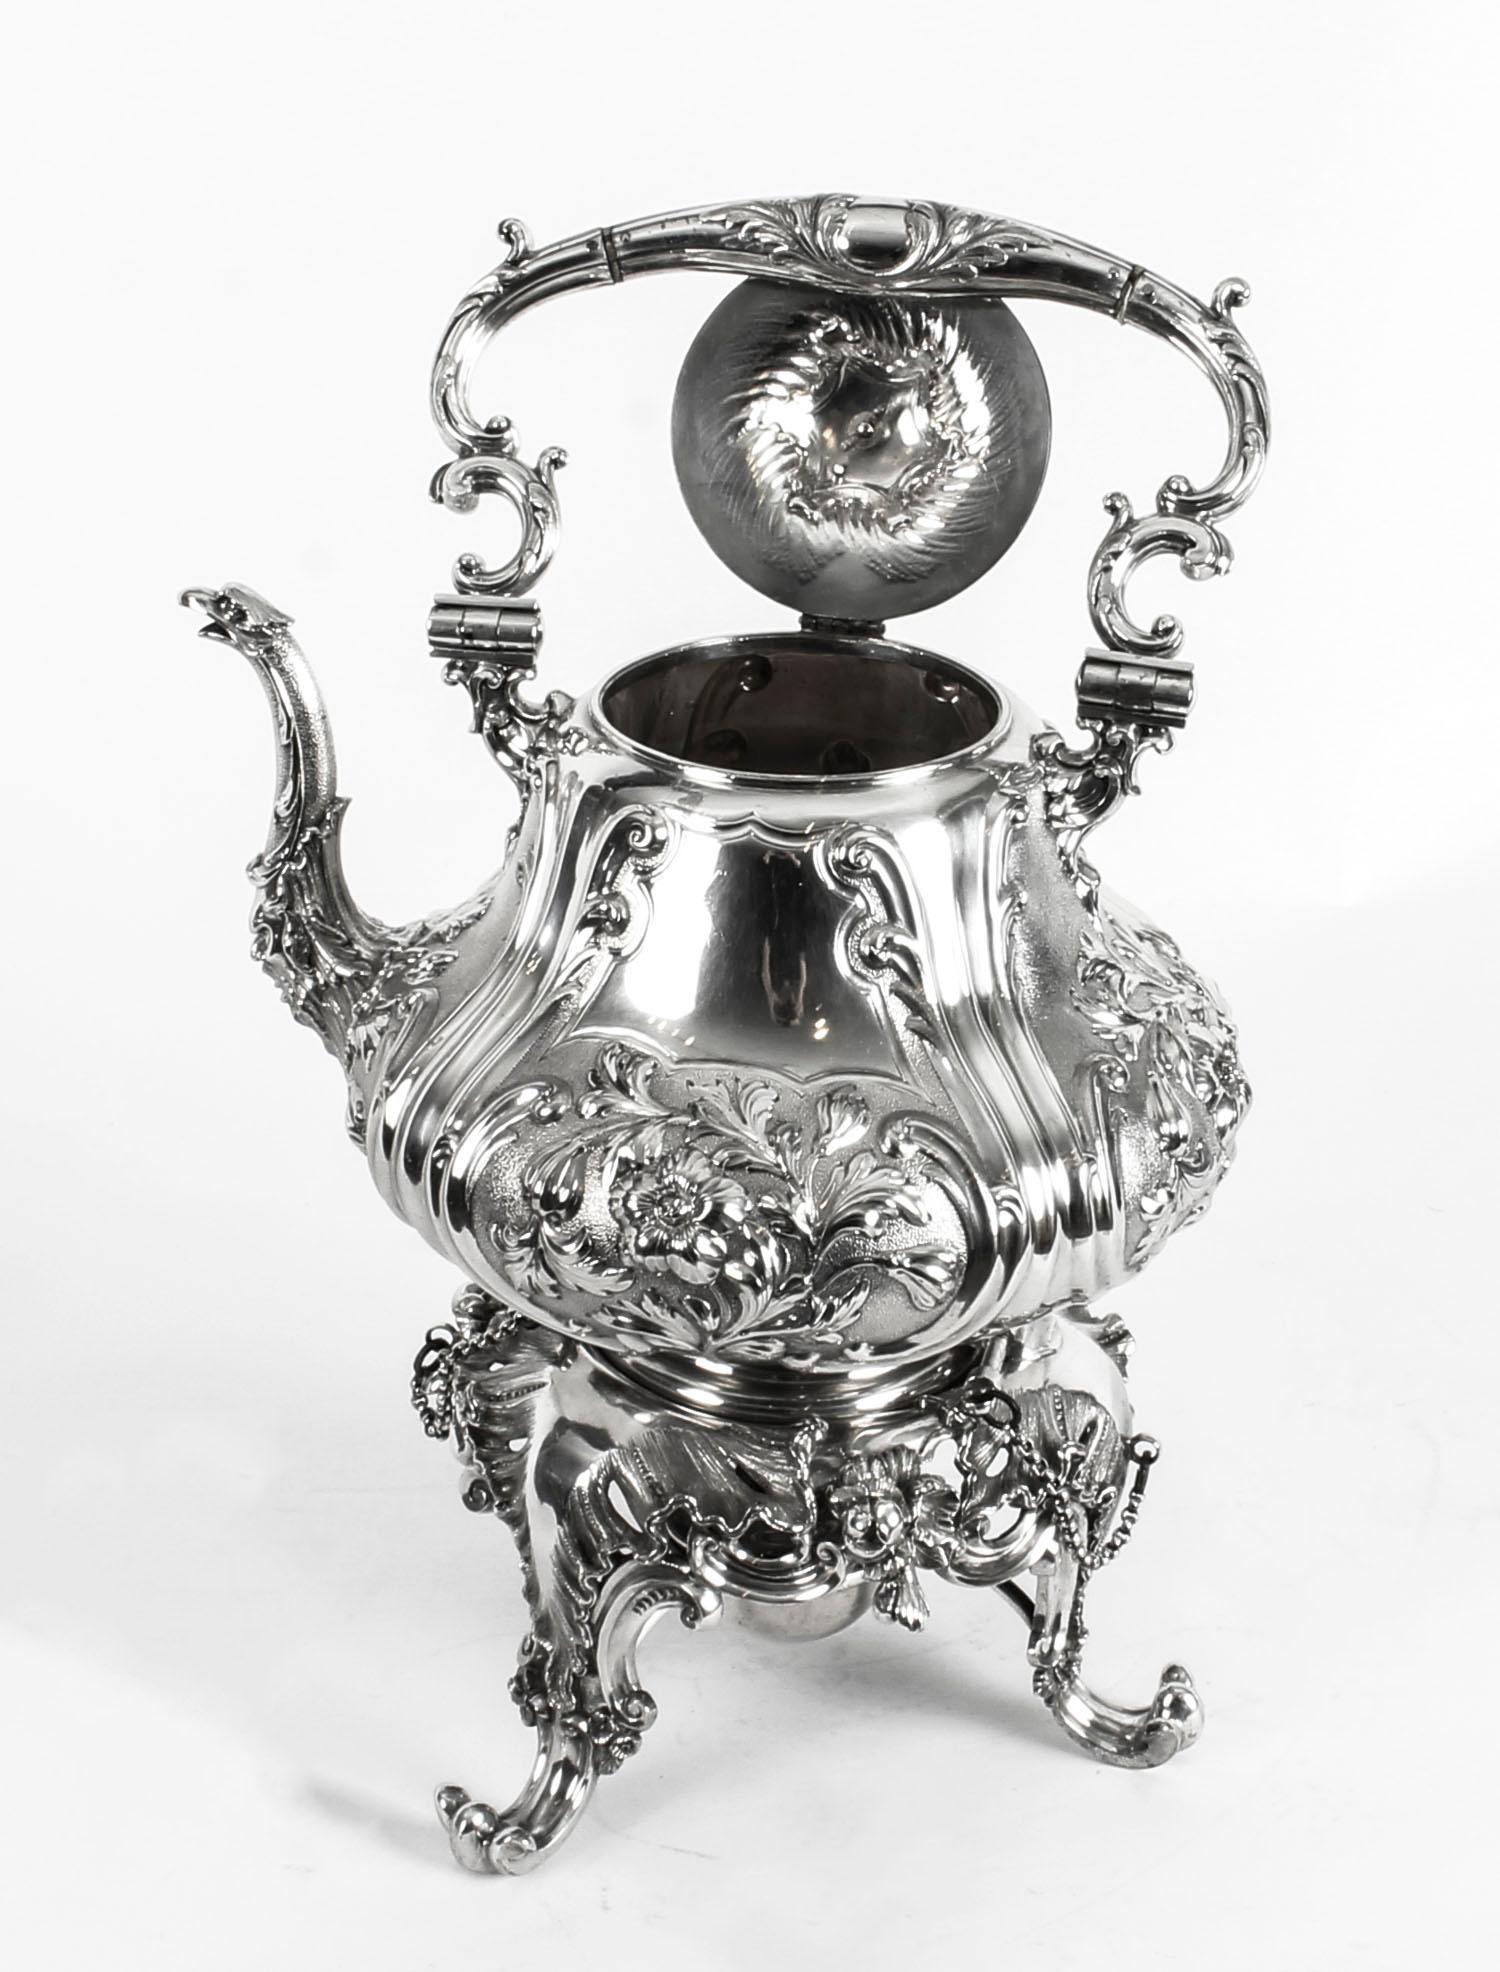 Antique Silver Plate Spirit Kettle on Stand by Elkington, 19th Century 1